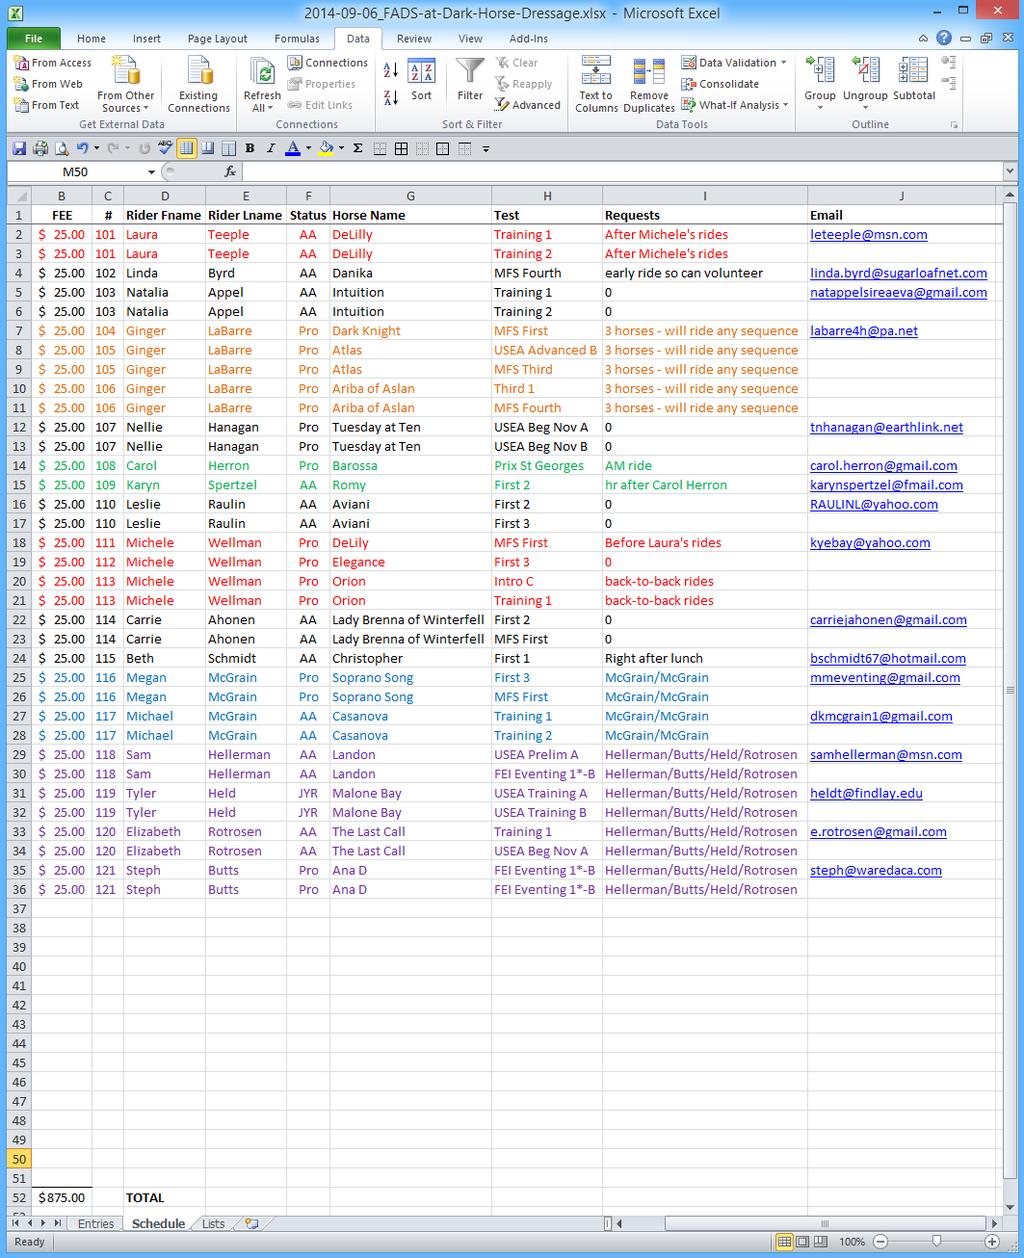 2. You now have a copy of the ❶ Entries spreadsheet that is named ❷ Schedule.